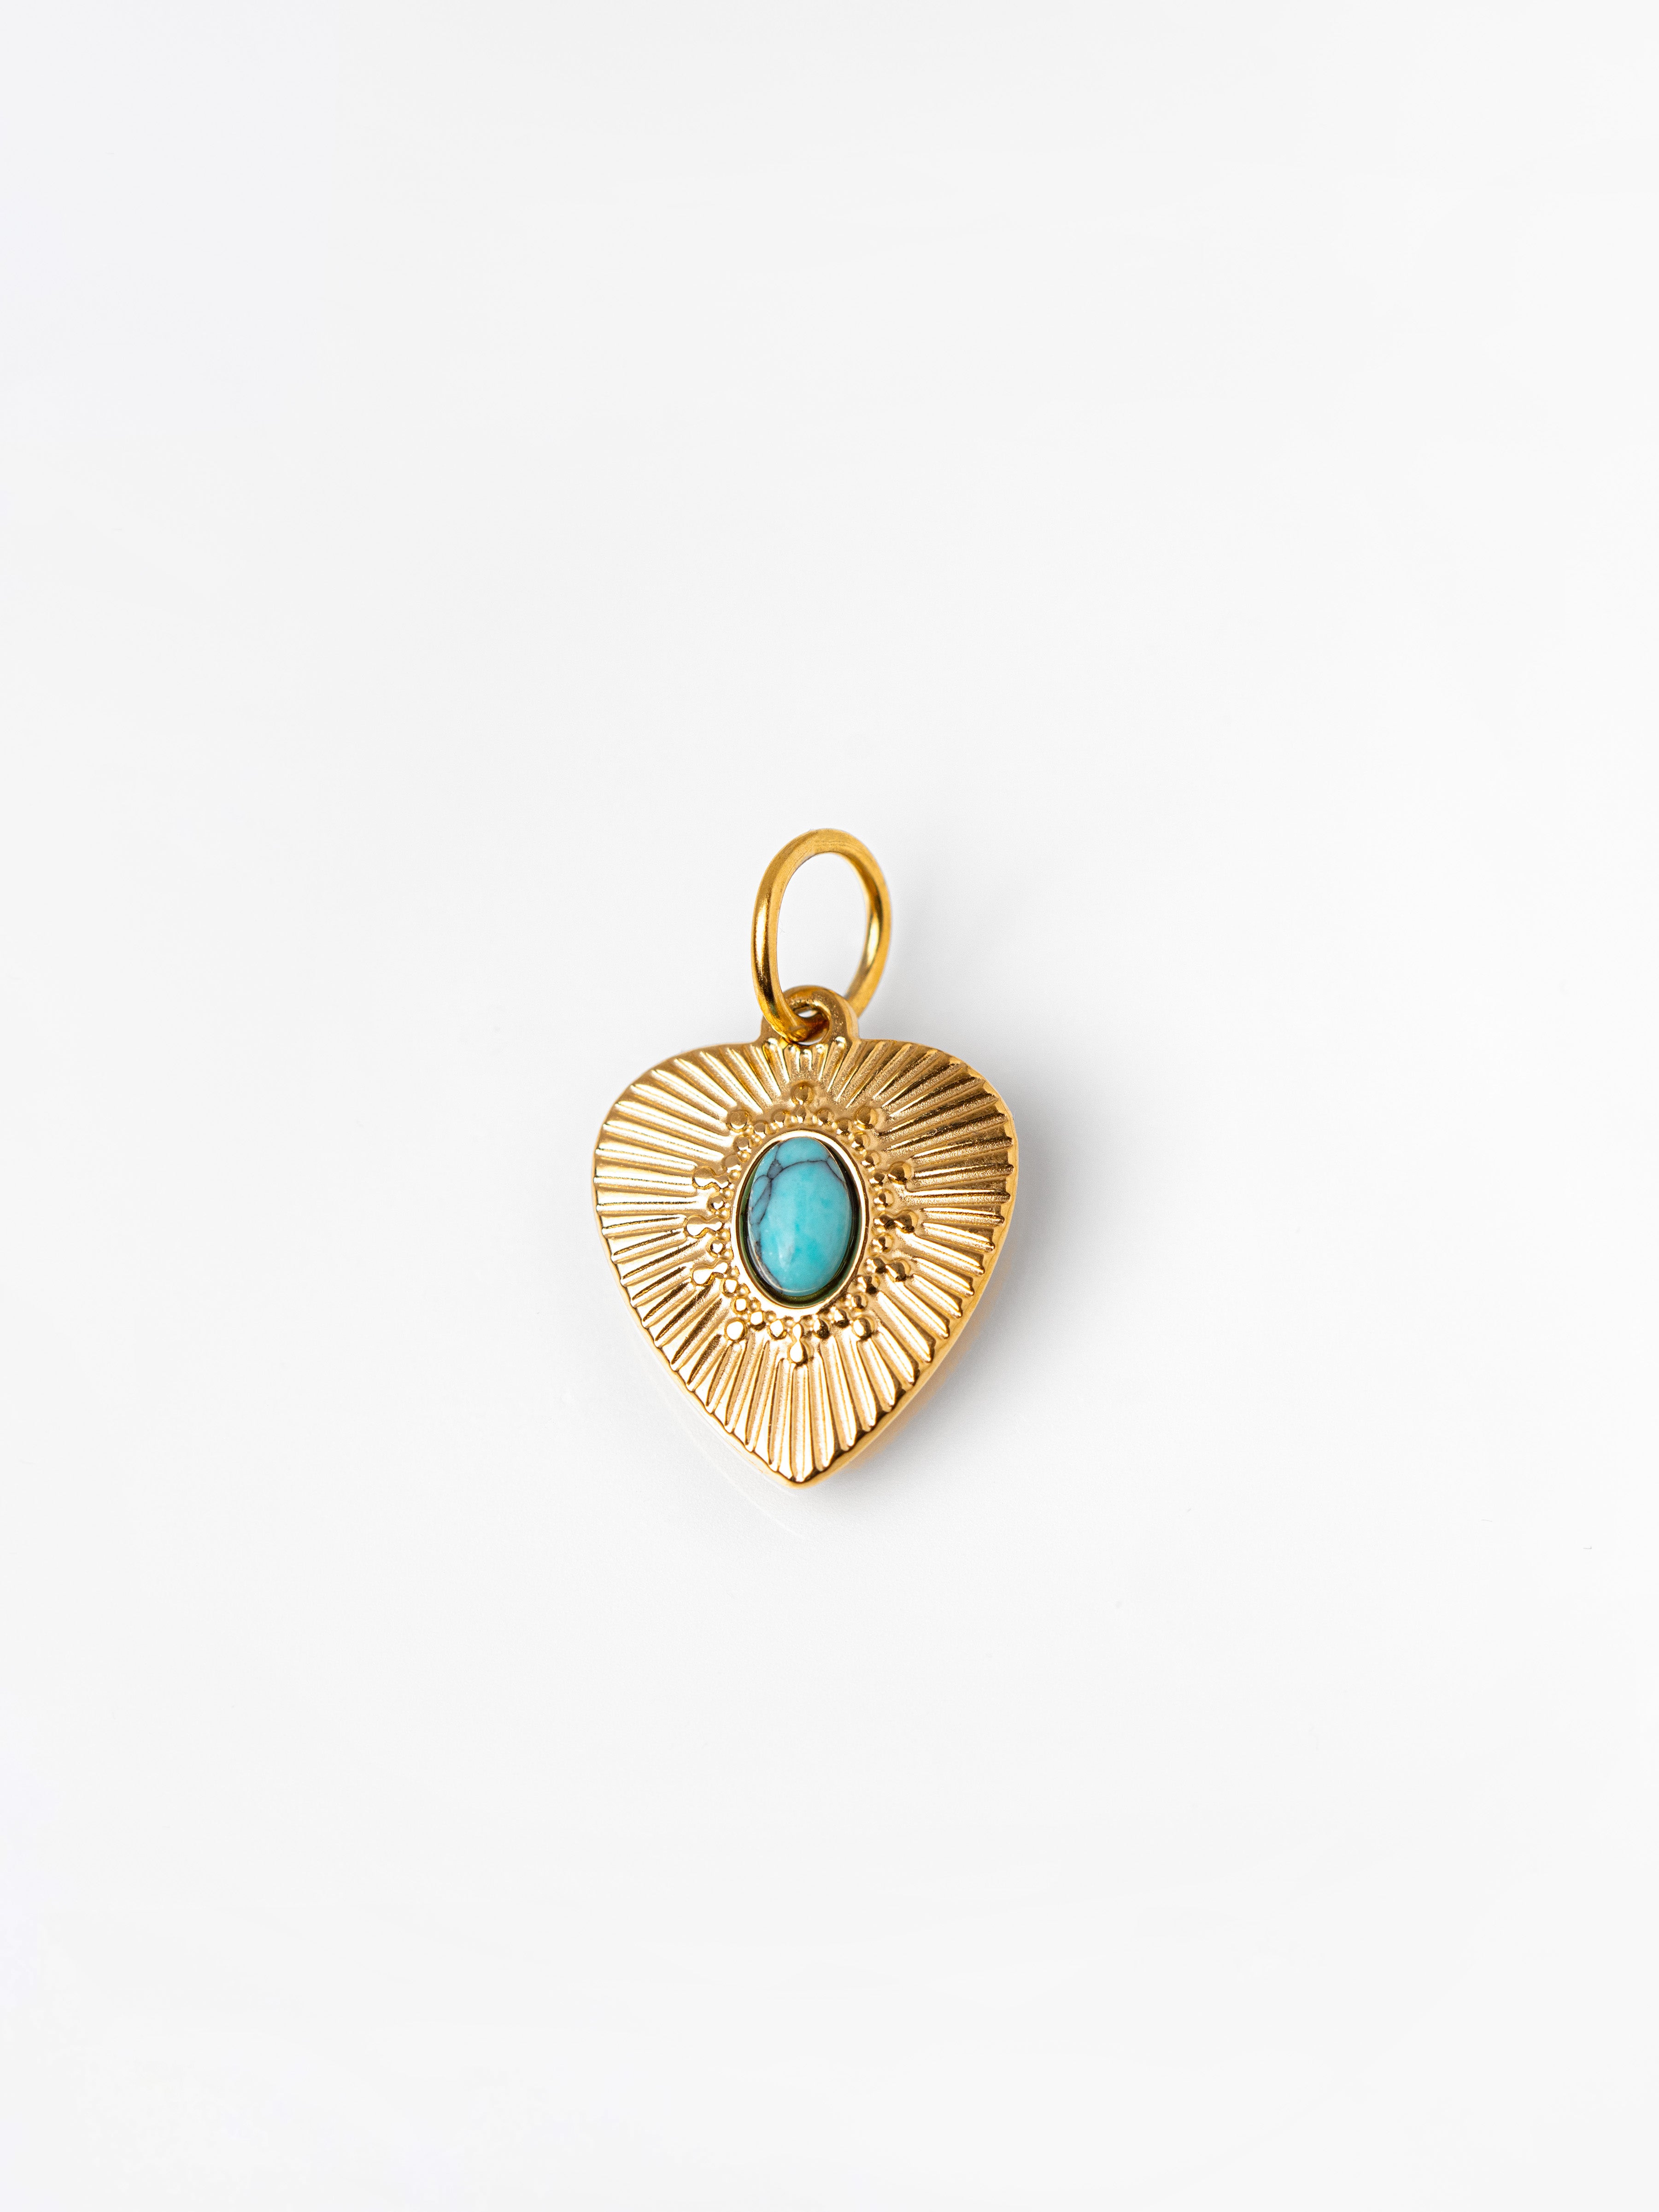 Gold Heart Coin Pendant / Charm With Turquoise Stone